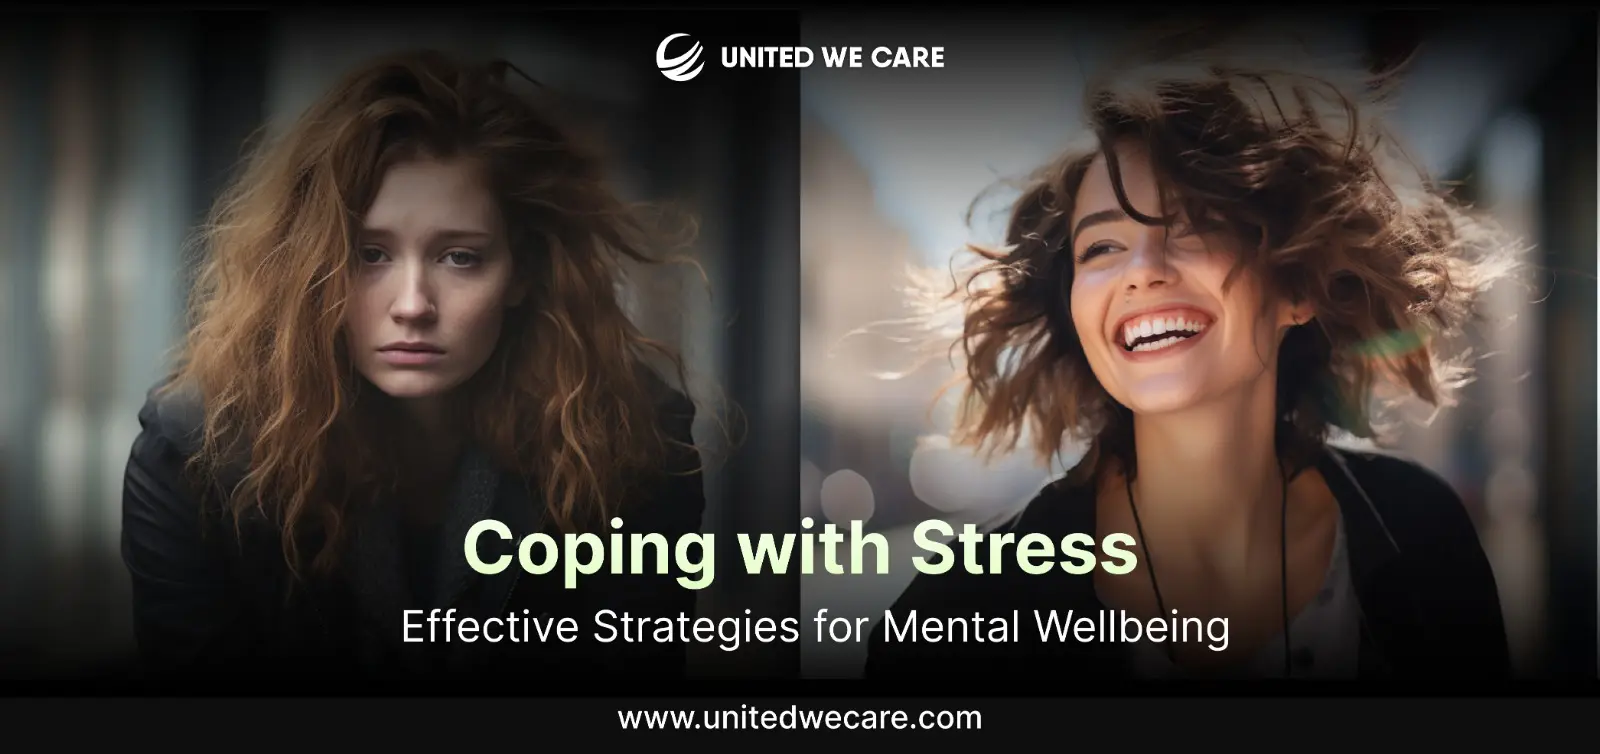 Coping with Stress: Effective Strategies for Mental Well Being